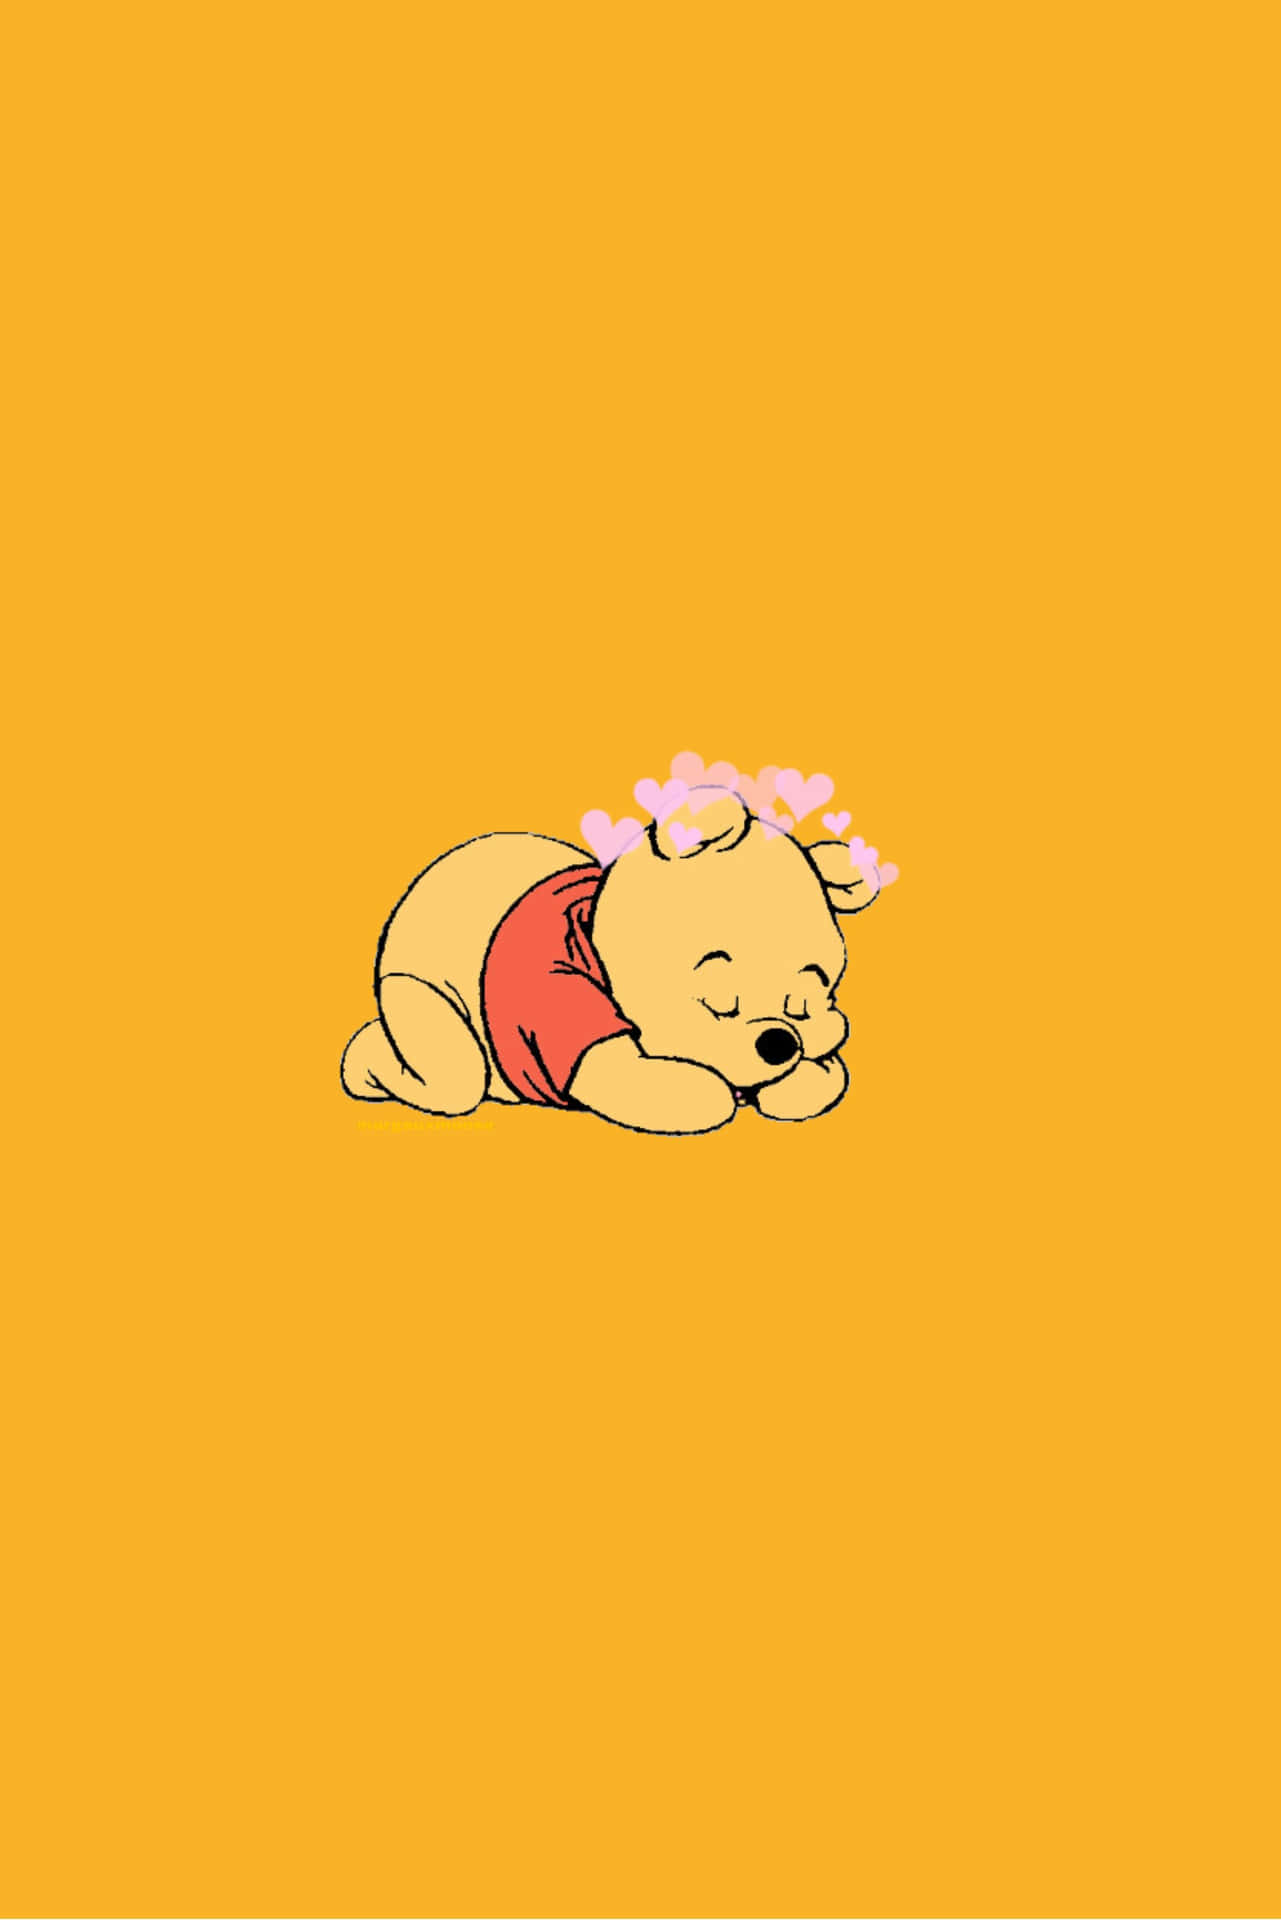 A Lovely Aesthetic With Winnie The Pooh Wallpaper